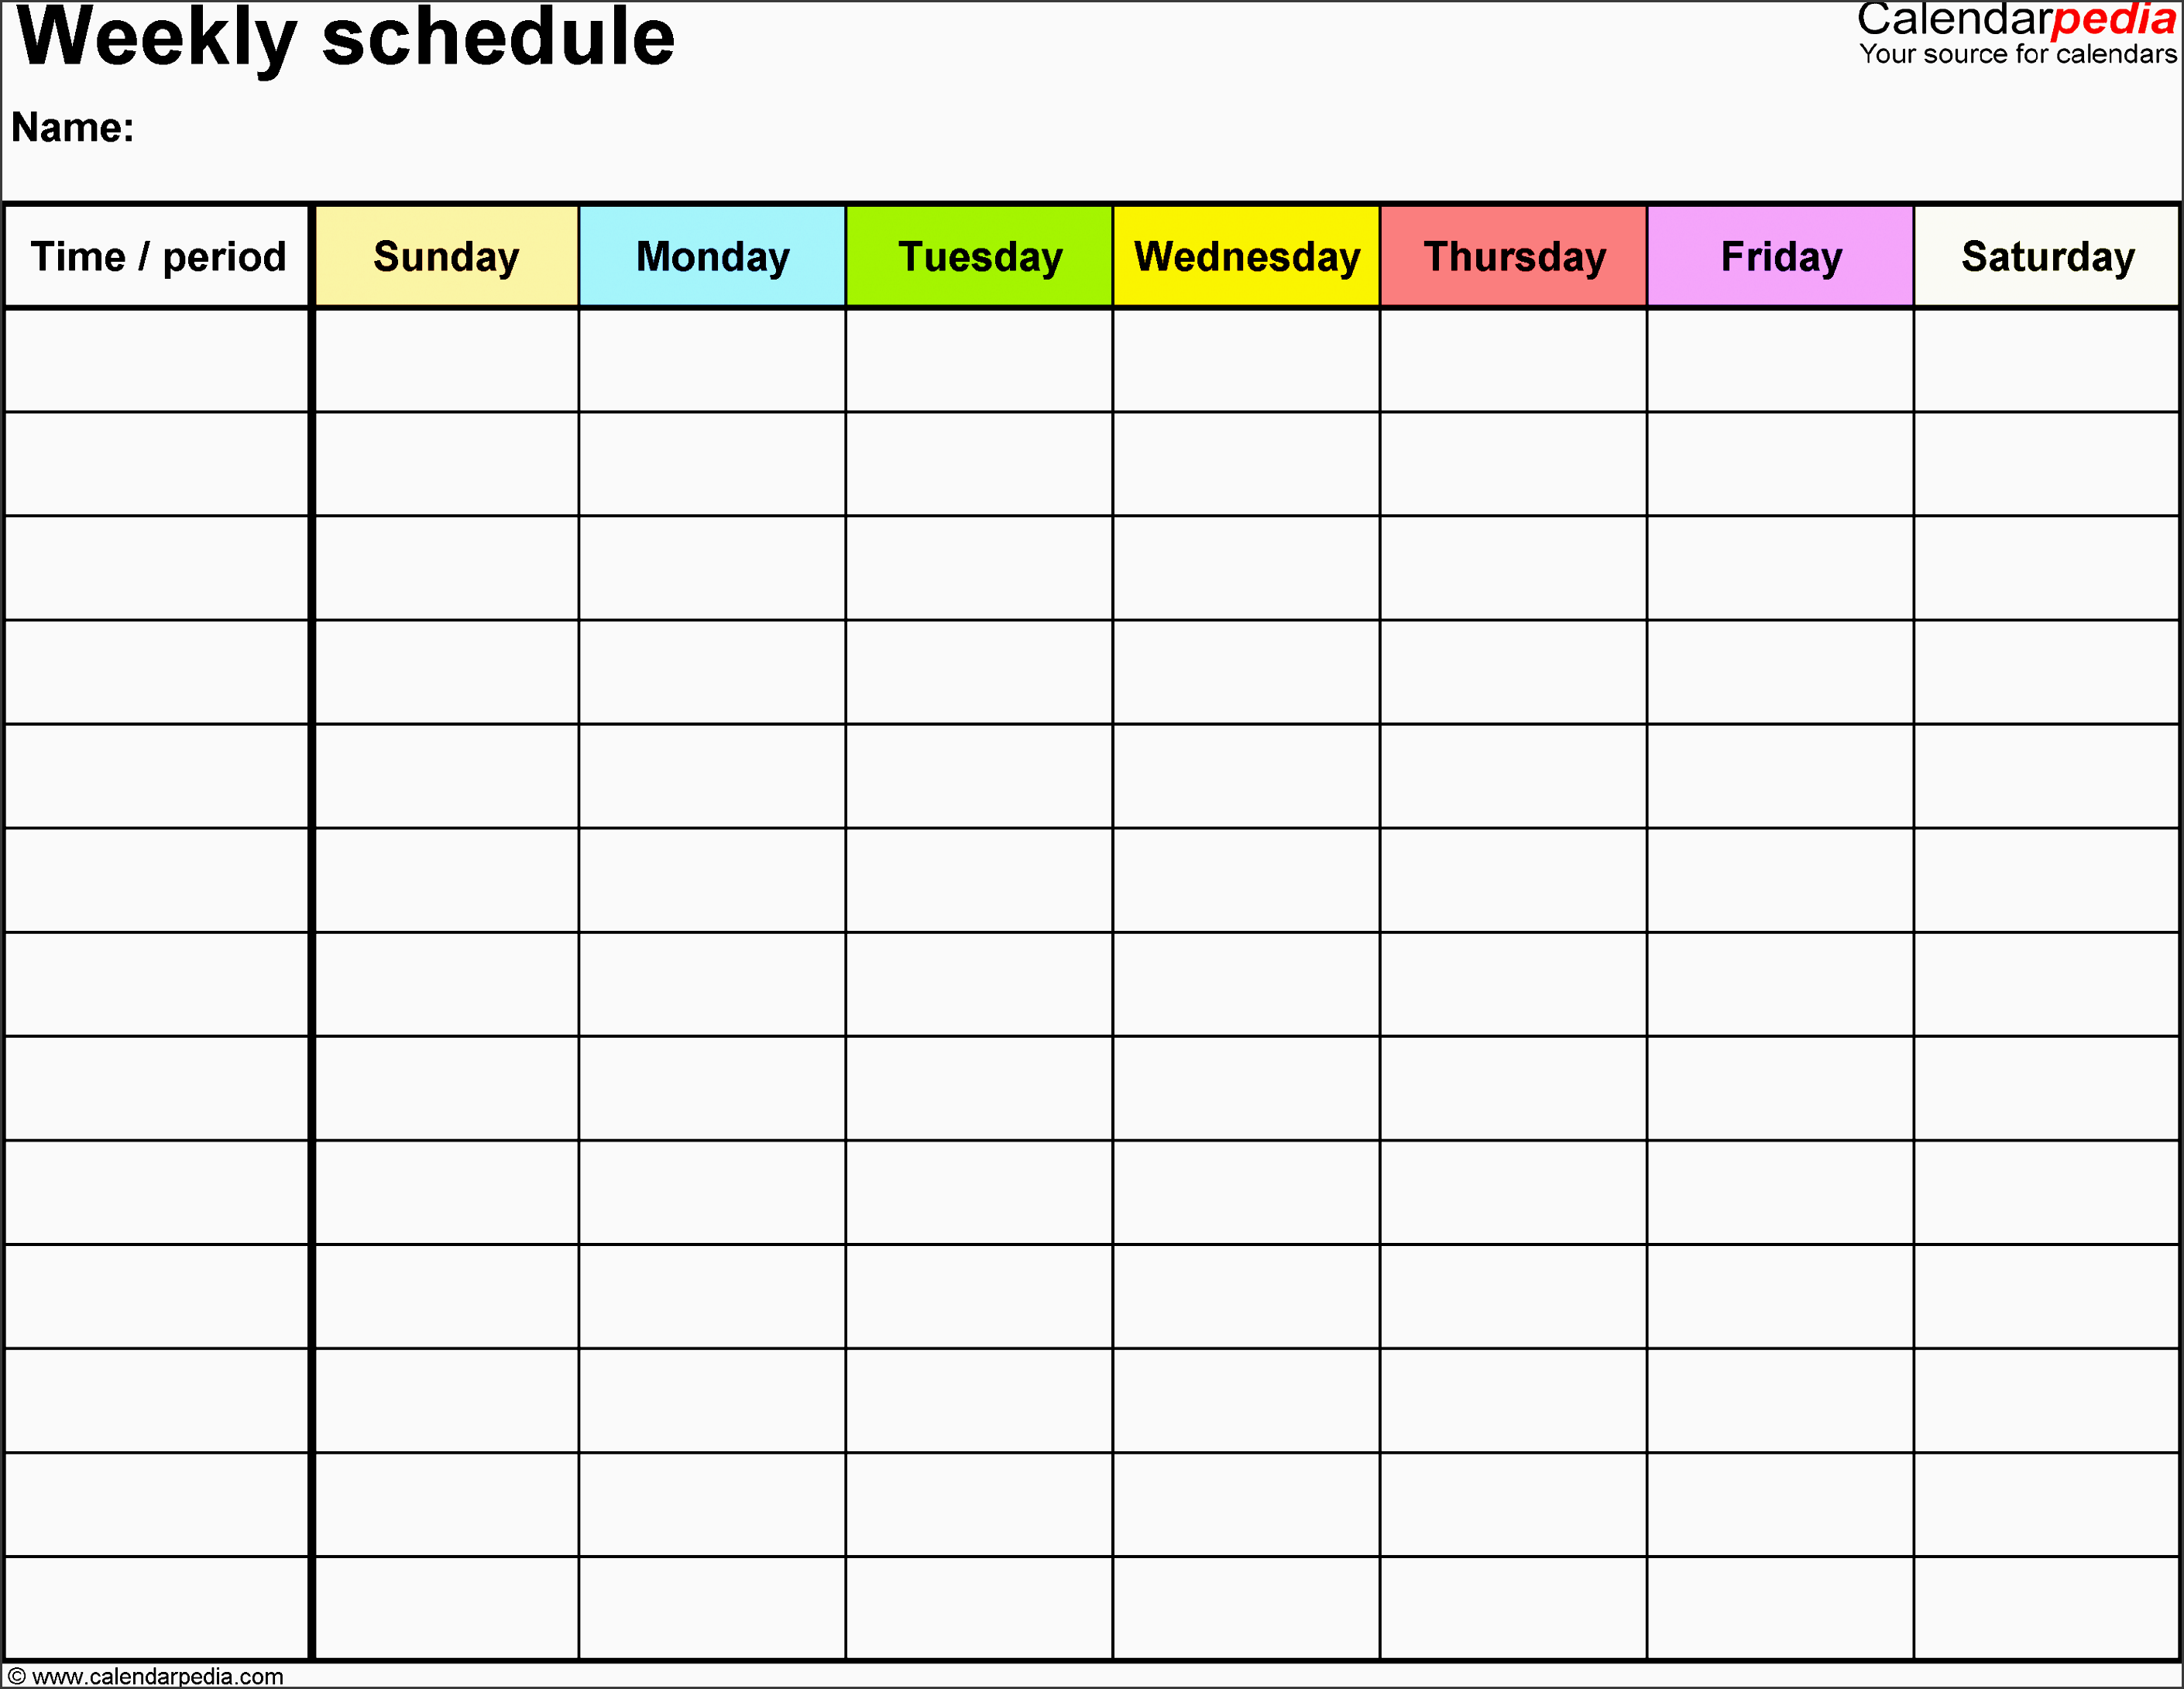 weekly schedule template for word version 13 landscape 1 page sunday to saturday